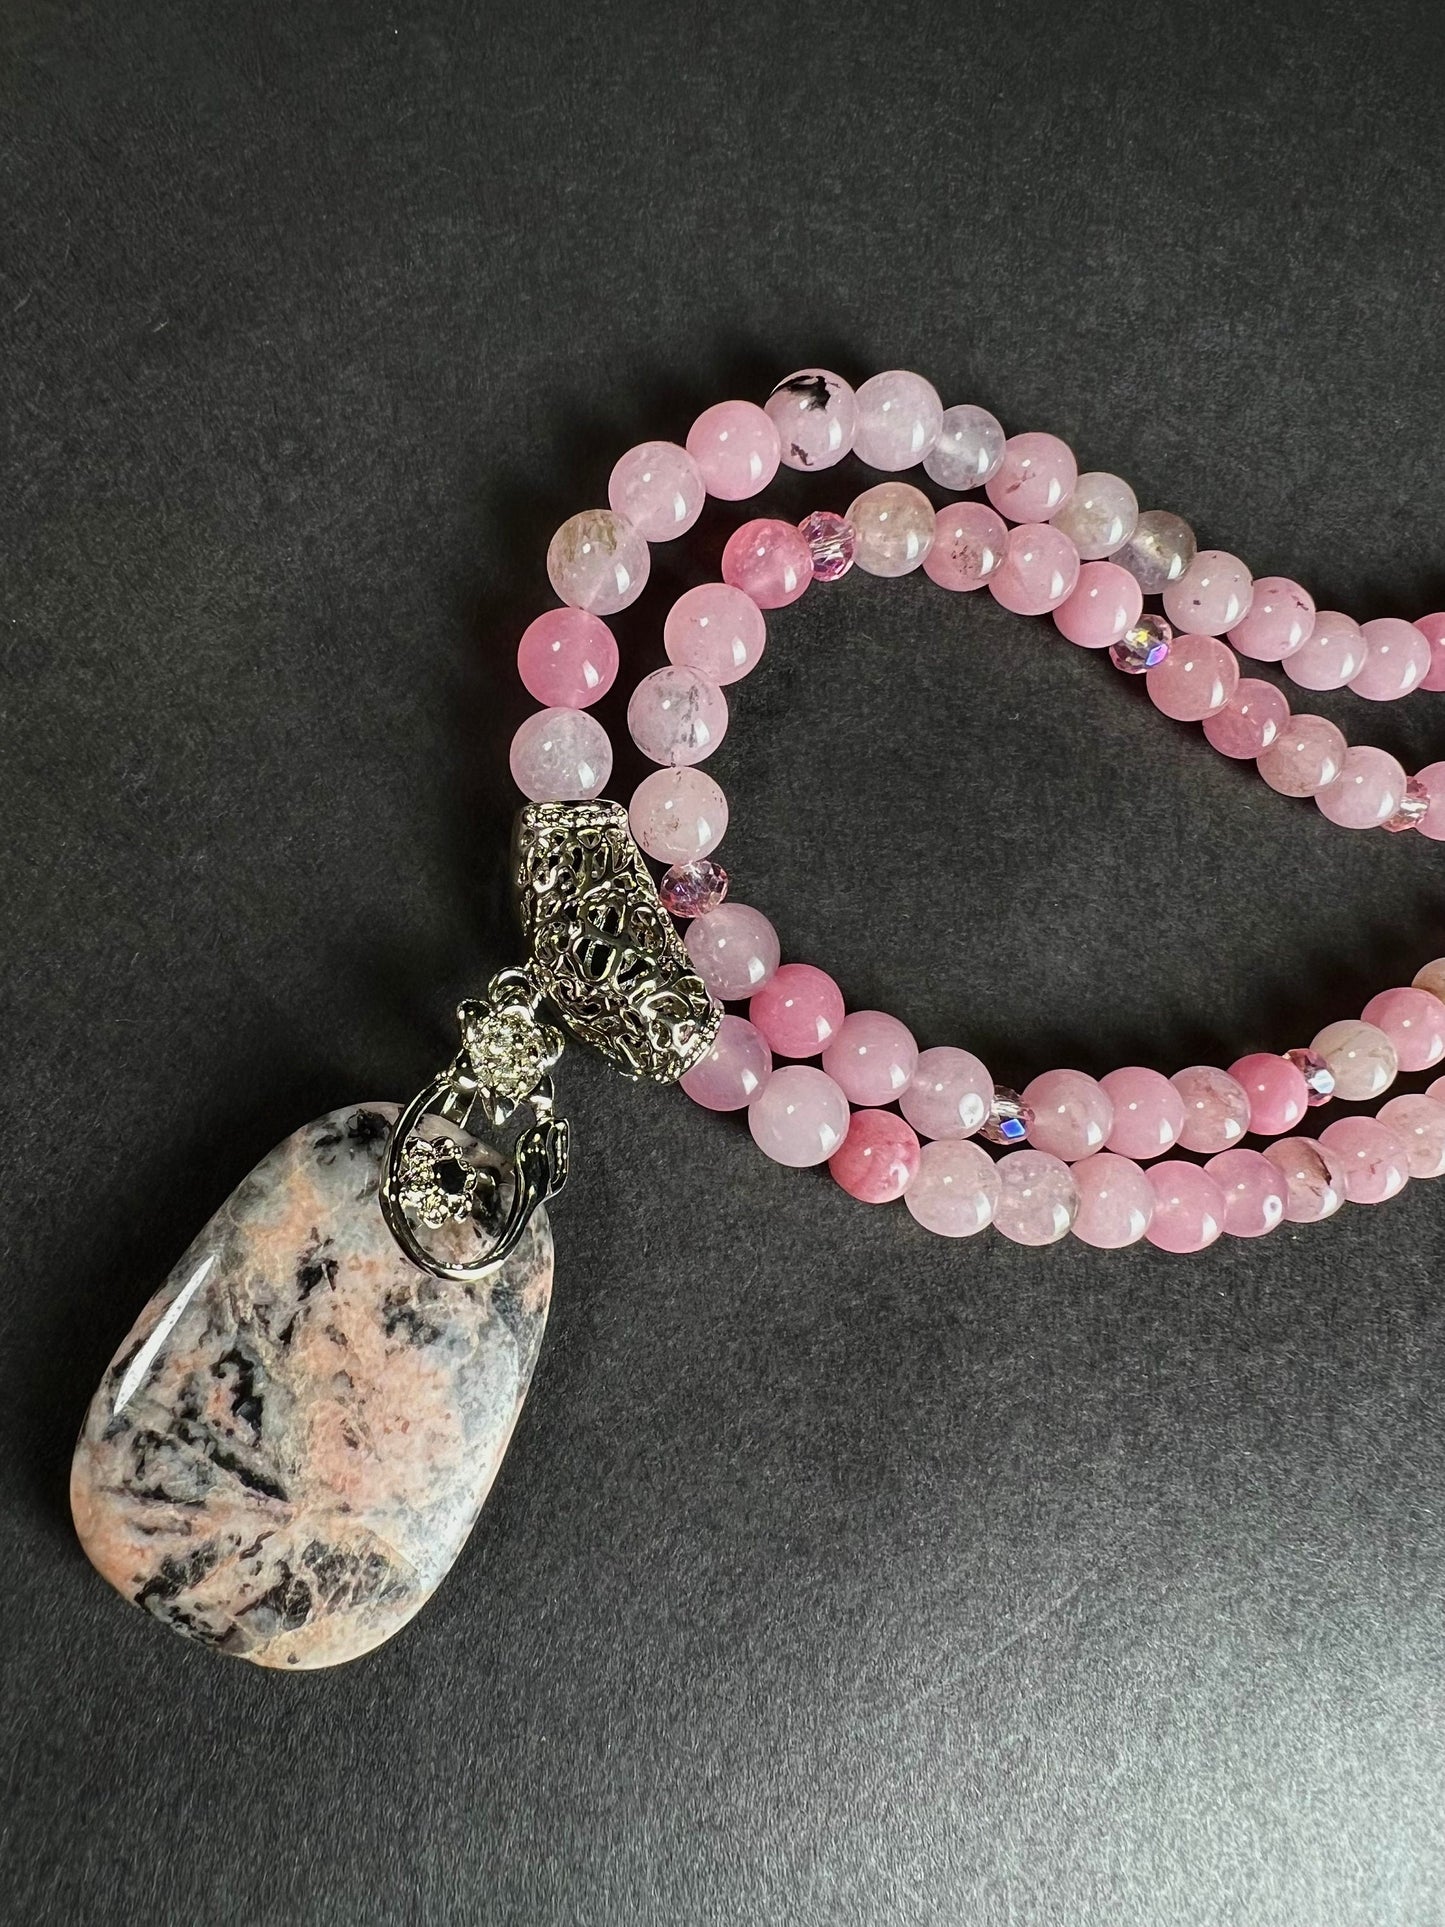 Natural Rhodonite pendant 8mm smooth round cherry Rhodonite icy pink beaded 2 line Necklace, fancy rhodium bail 18" plus 2" Ext